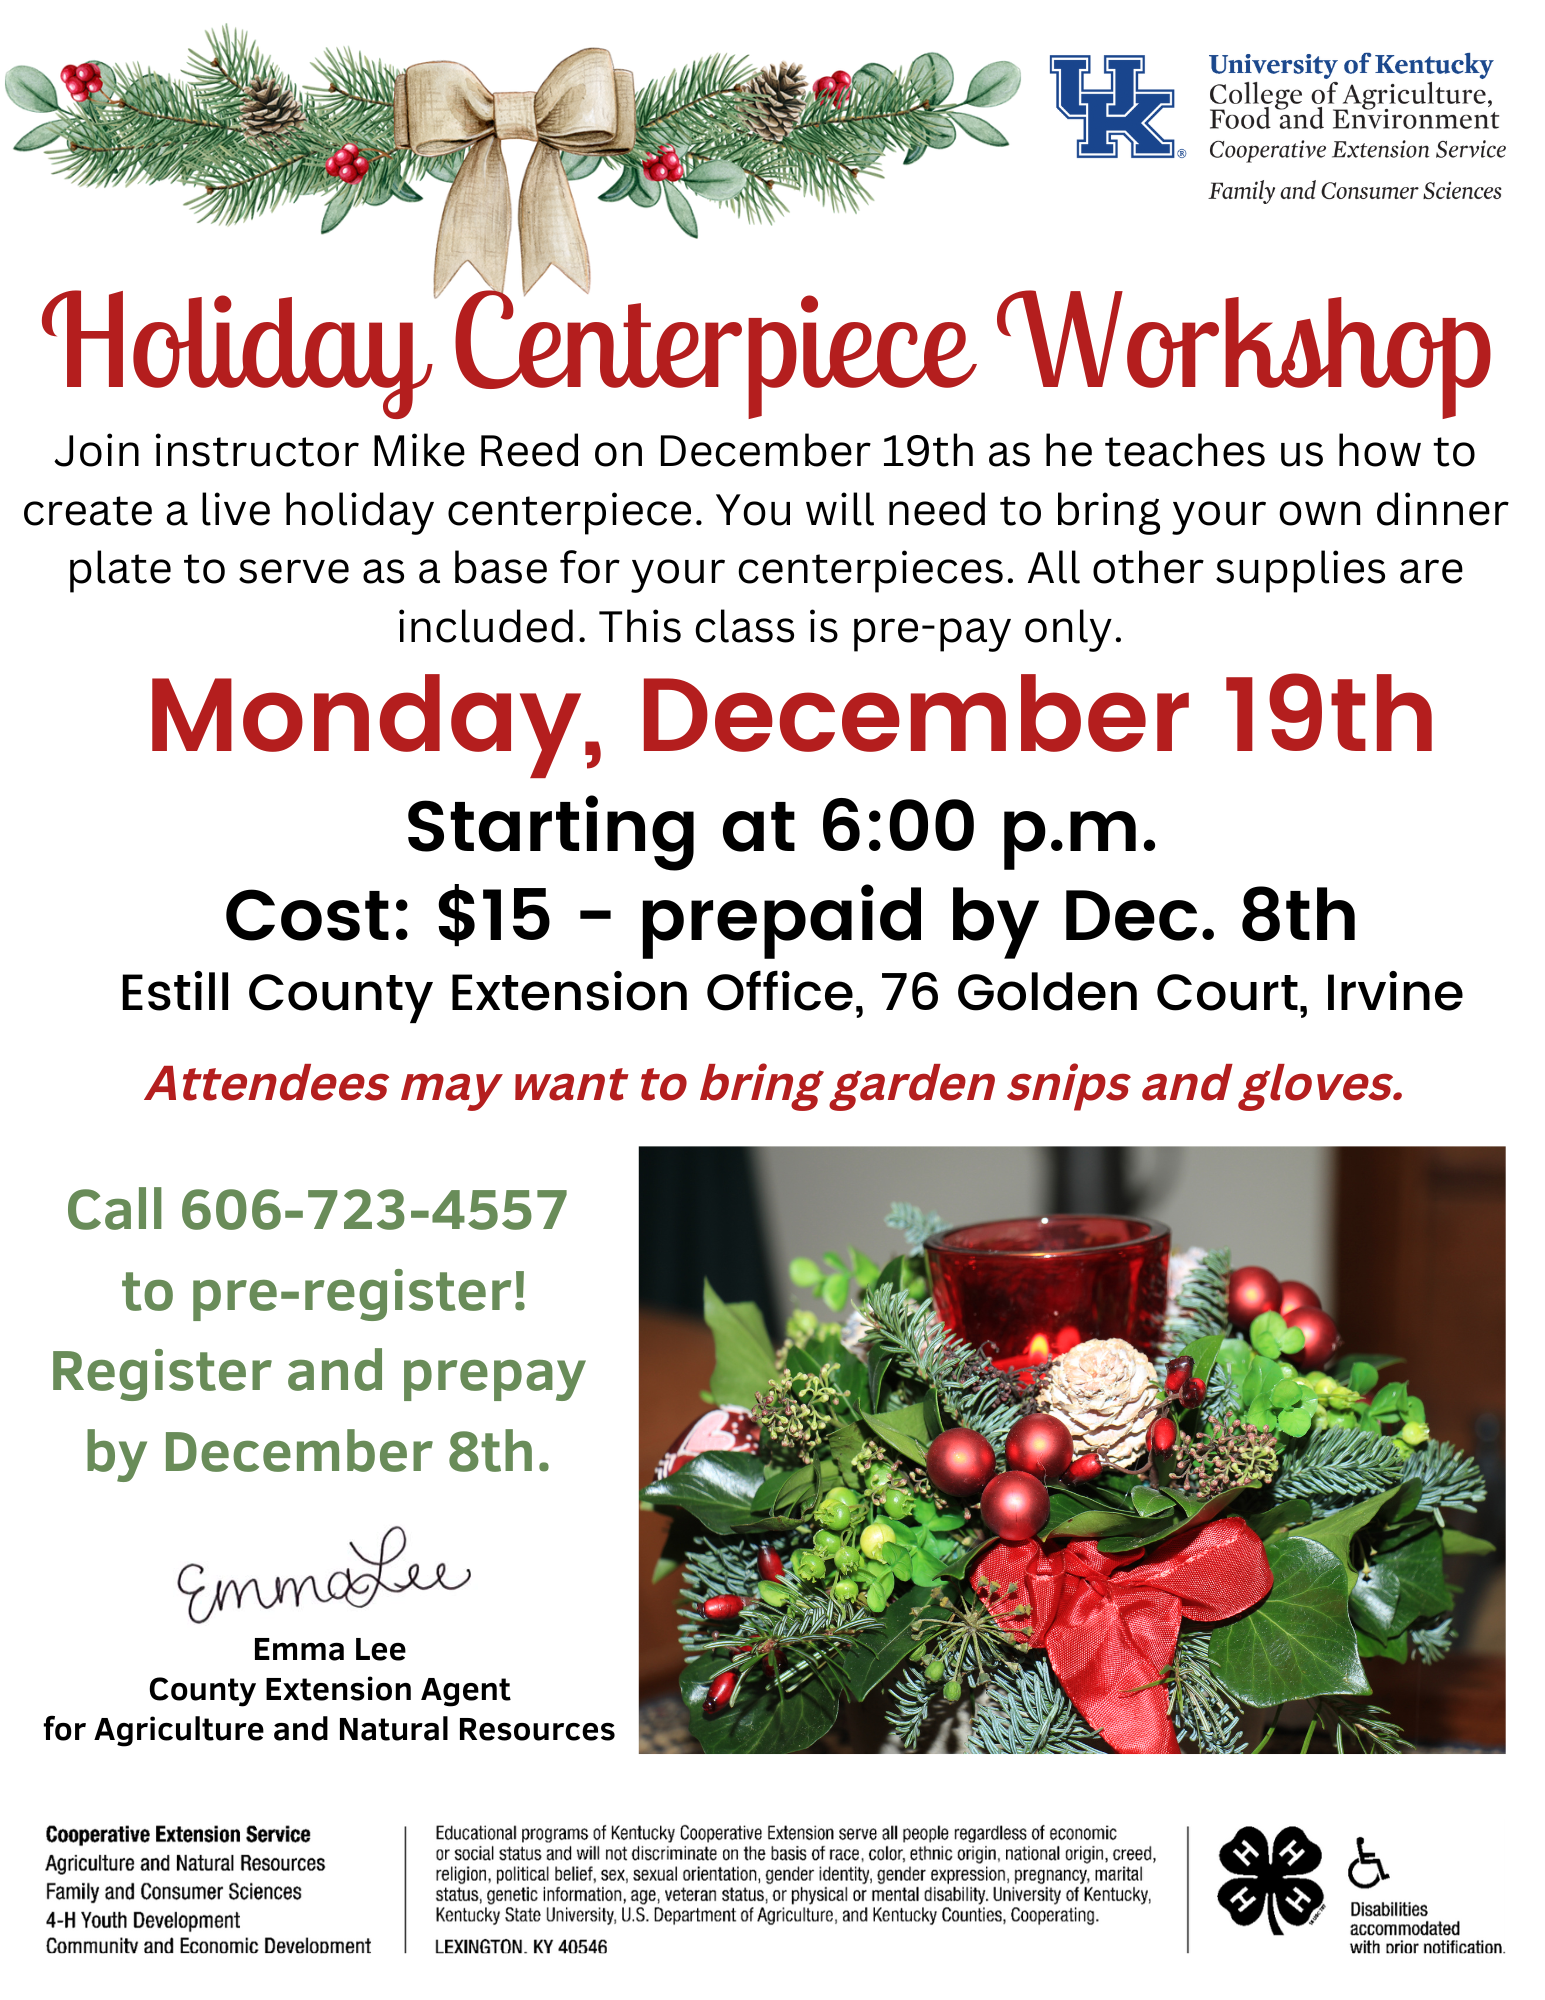 Flyer with details on Holiday Centerpiece Workshop that will be held Monday, Dec. 19